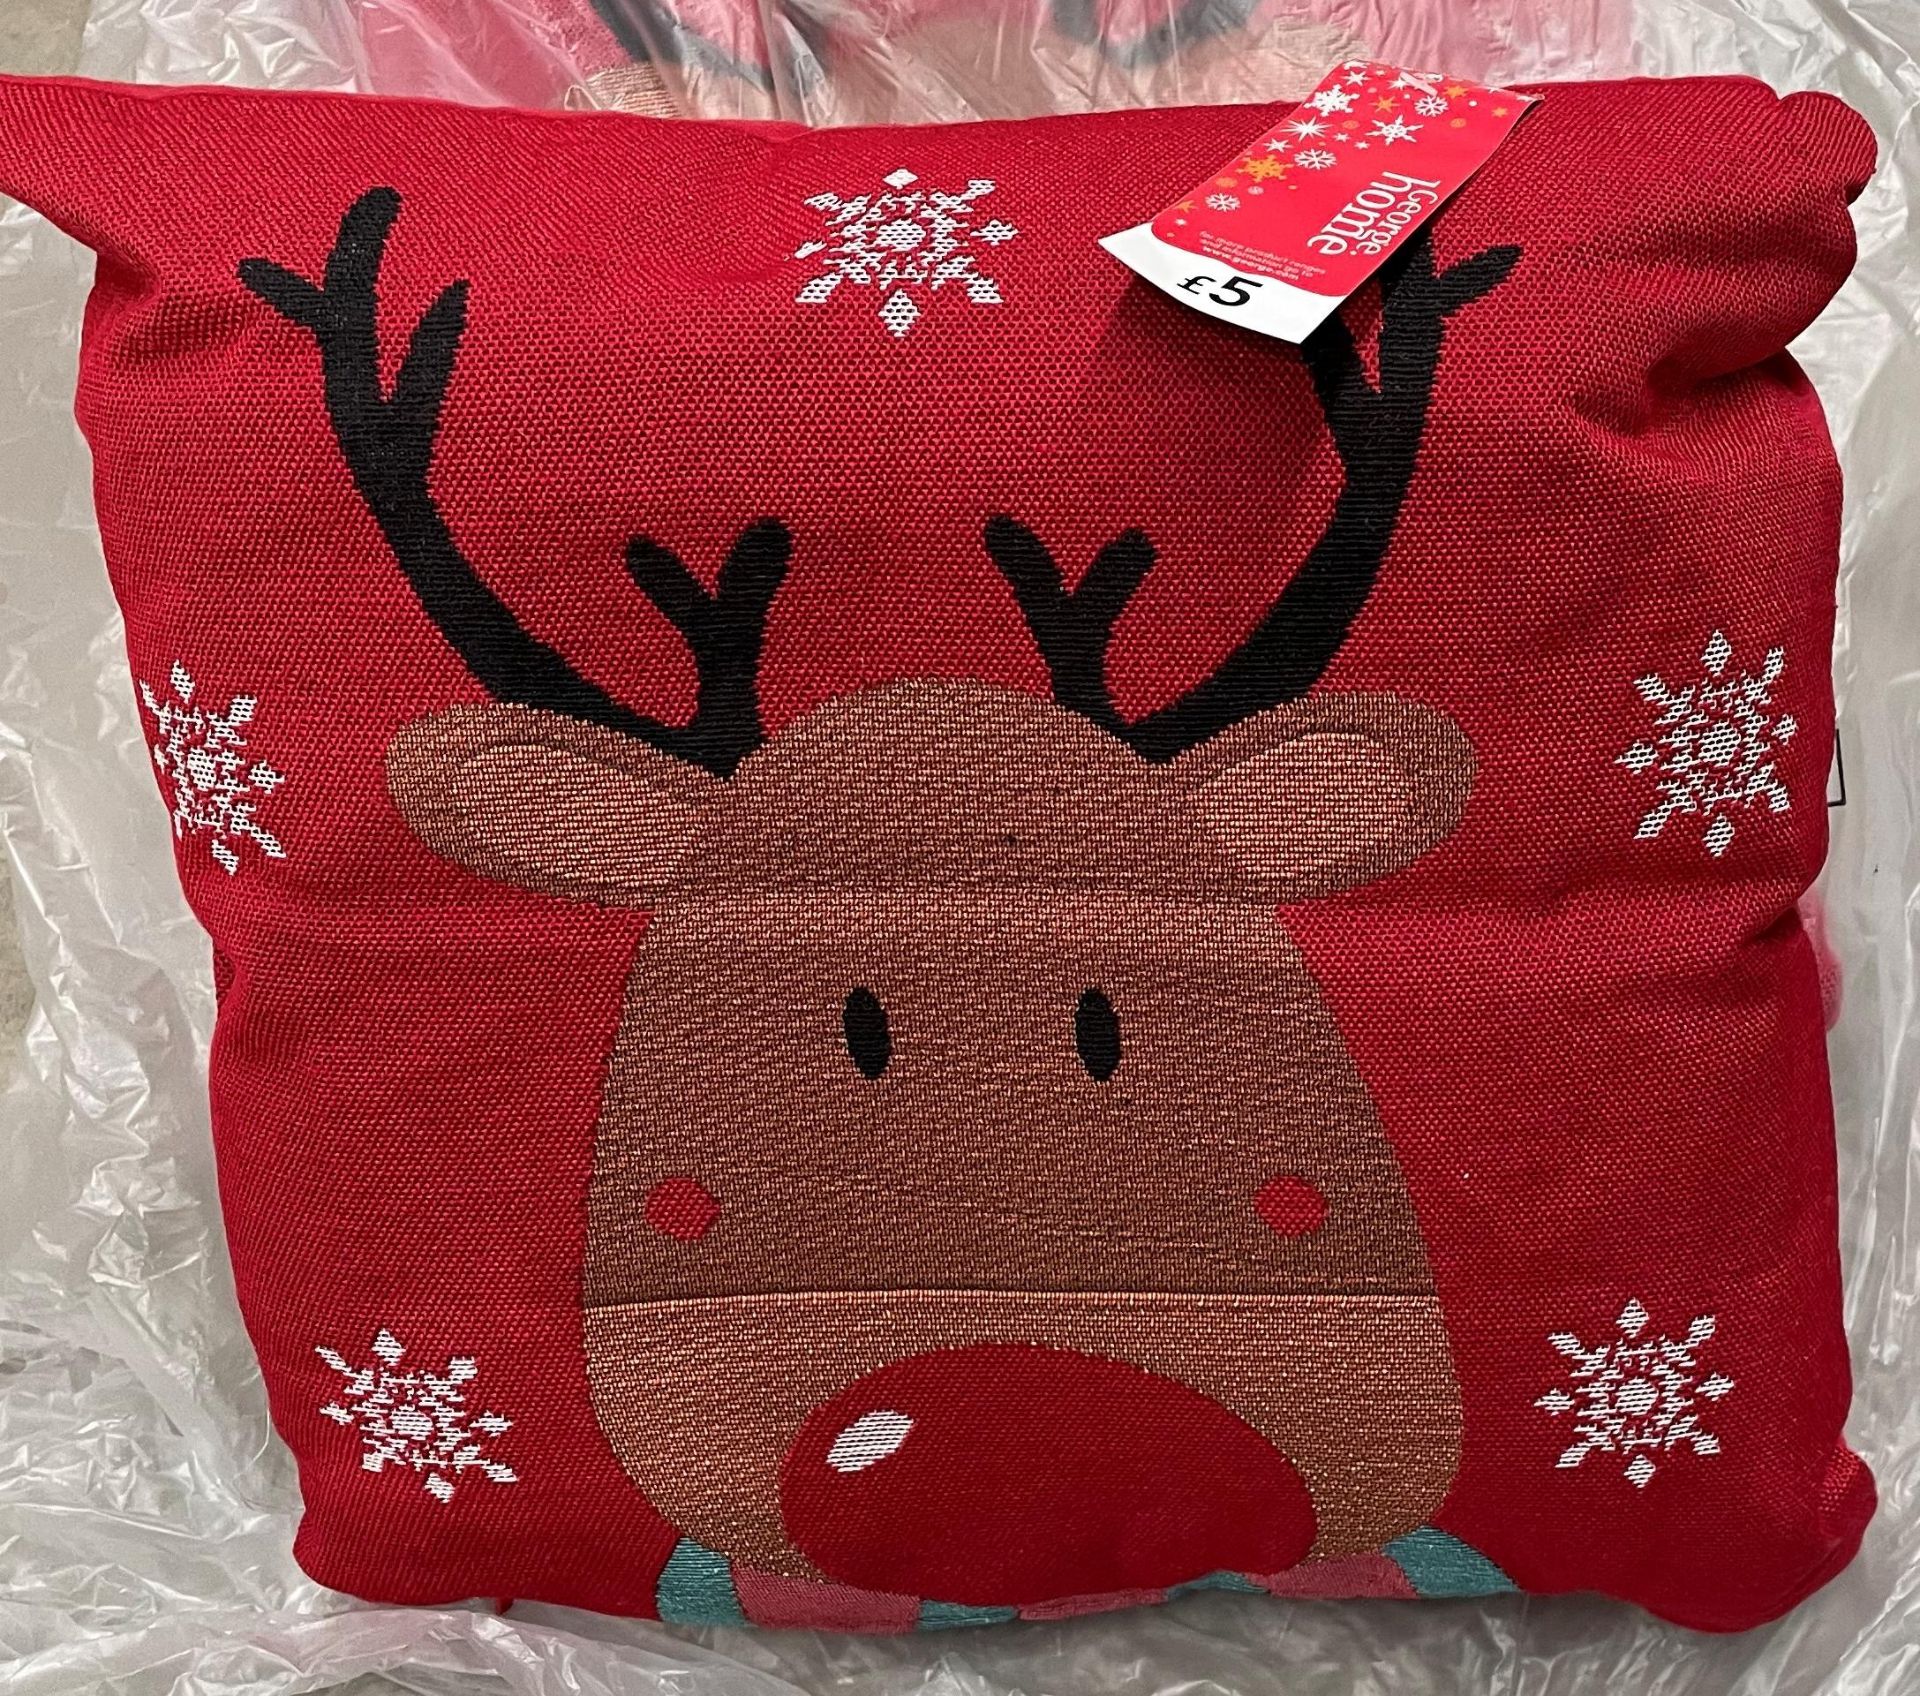 48 x George Home - Rudolph Tapestry Reindeer Christmas Cushions - 38 x 38cm - (24 x packs of 2)